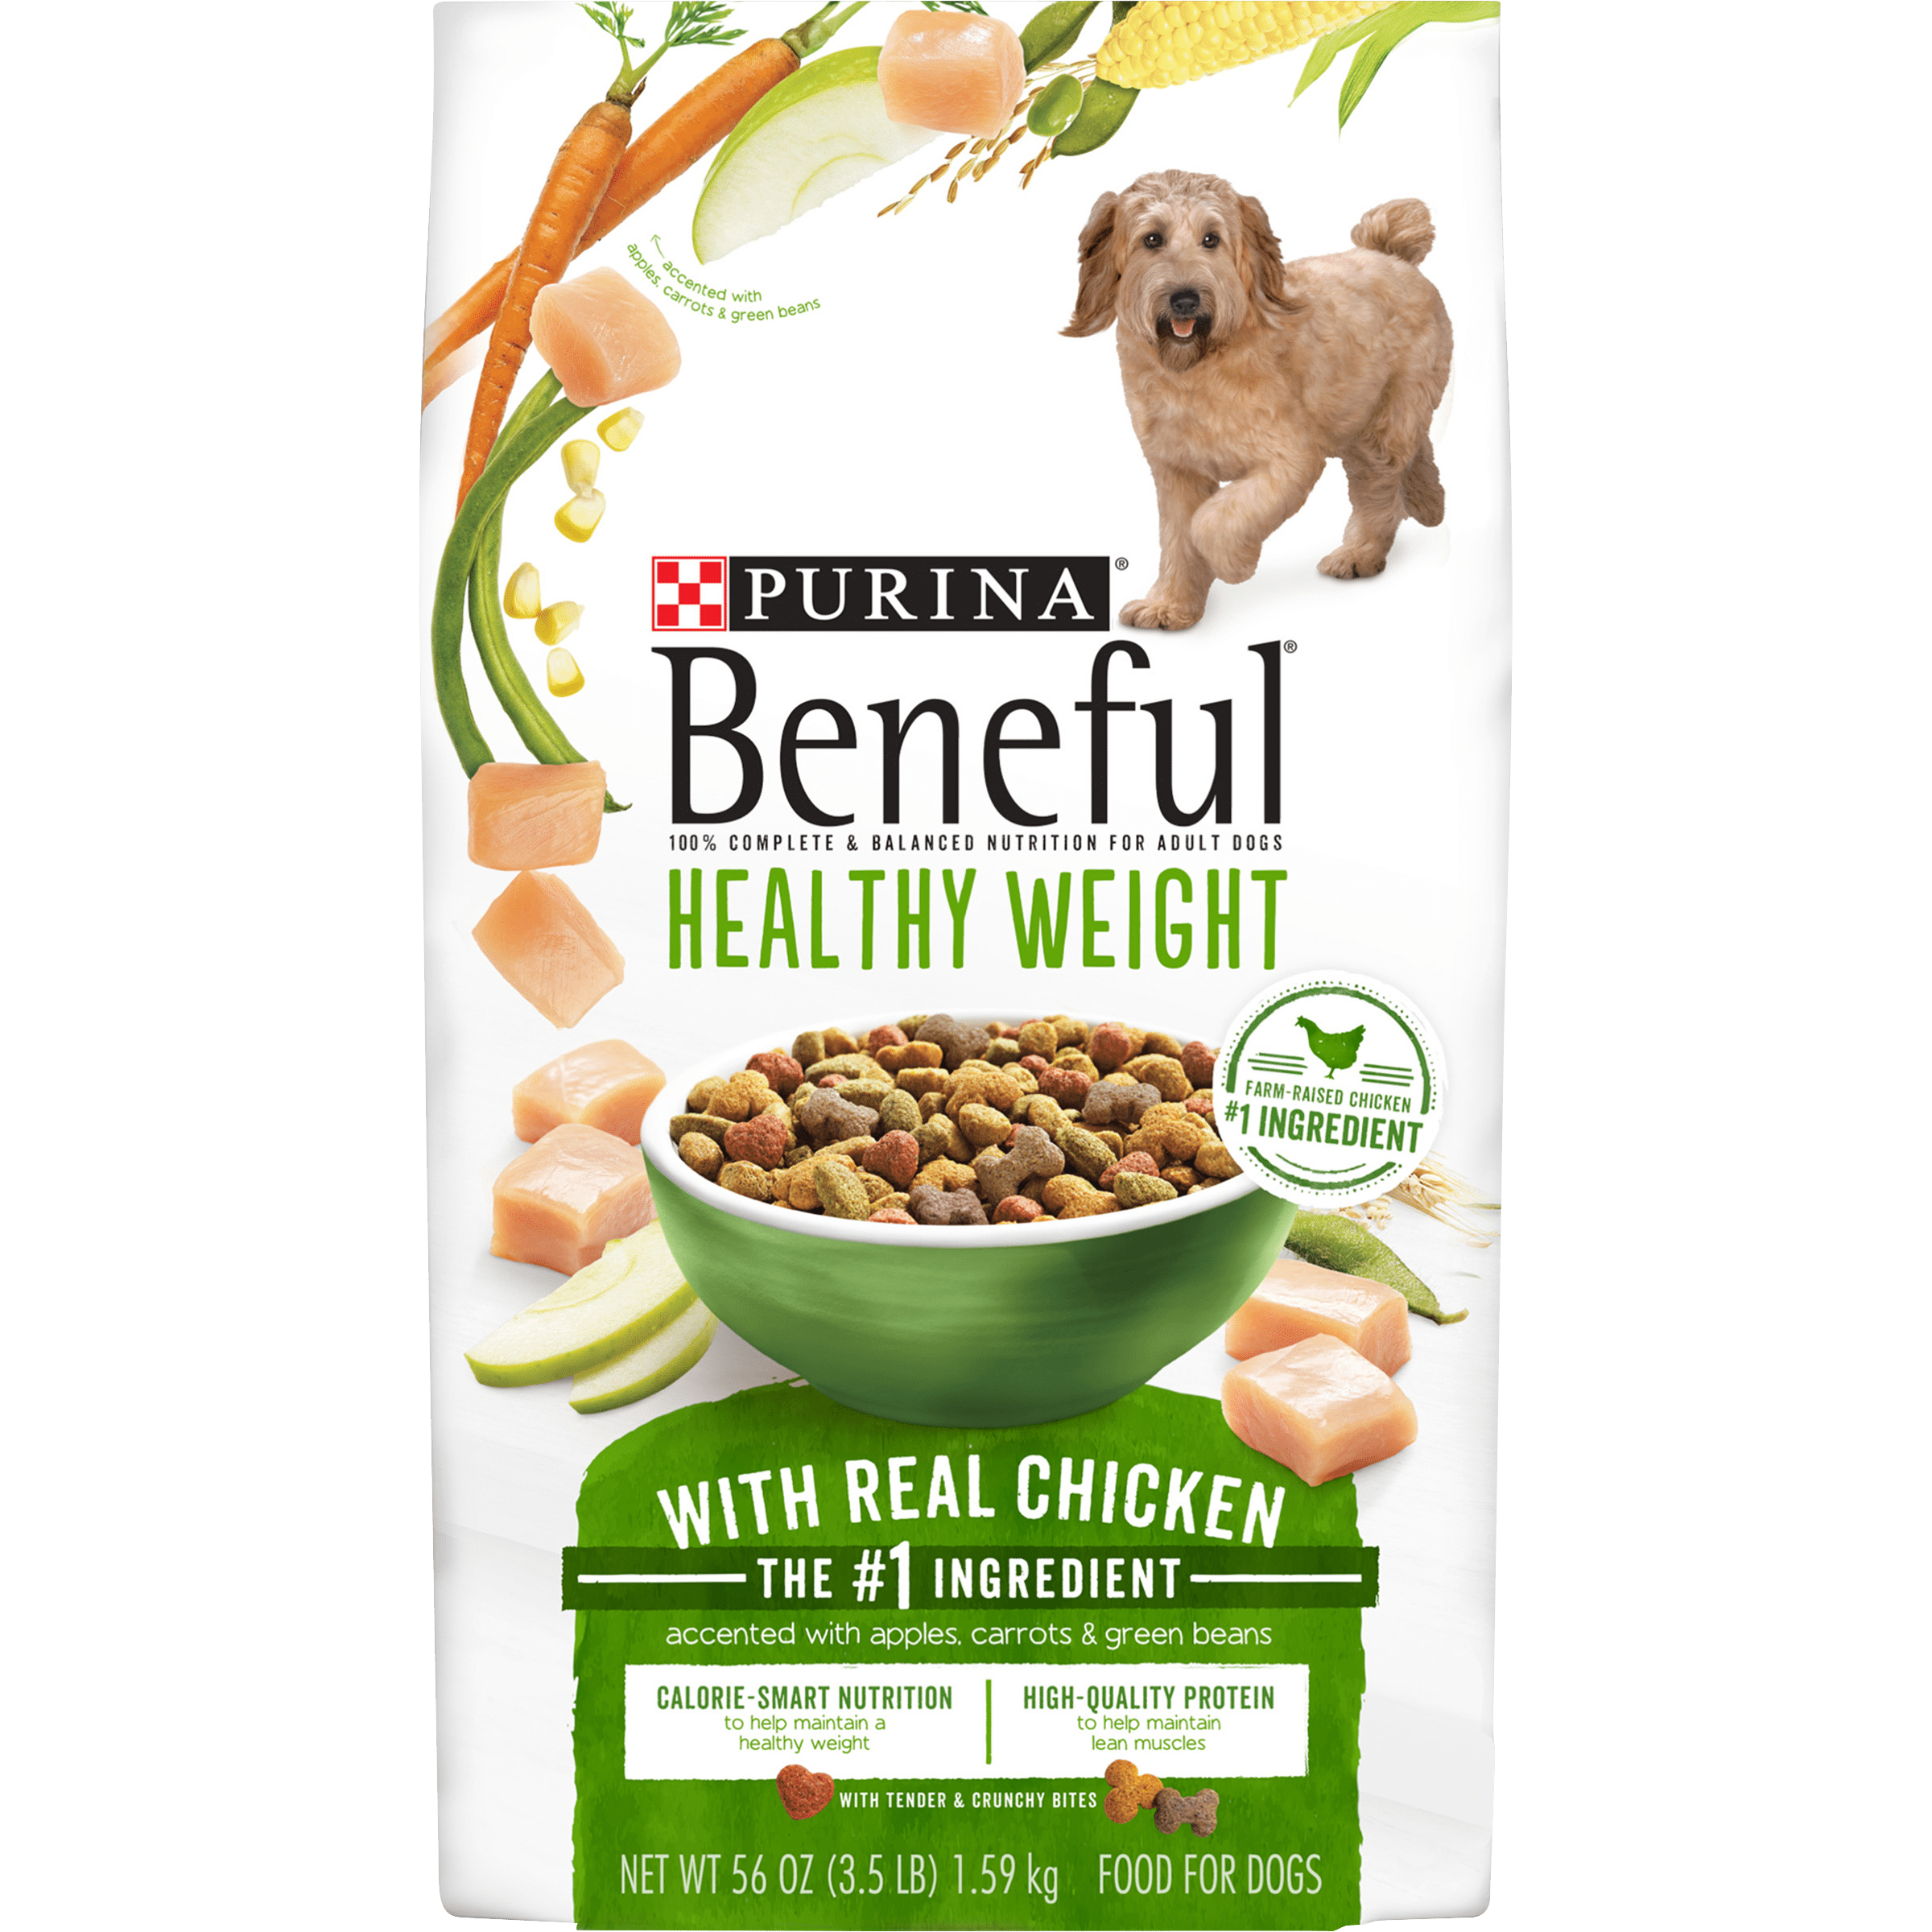 Purina Beneful Healthy Weight Dry Dog Food, Healthy Weight